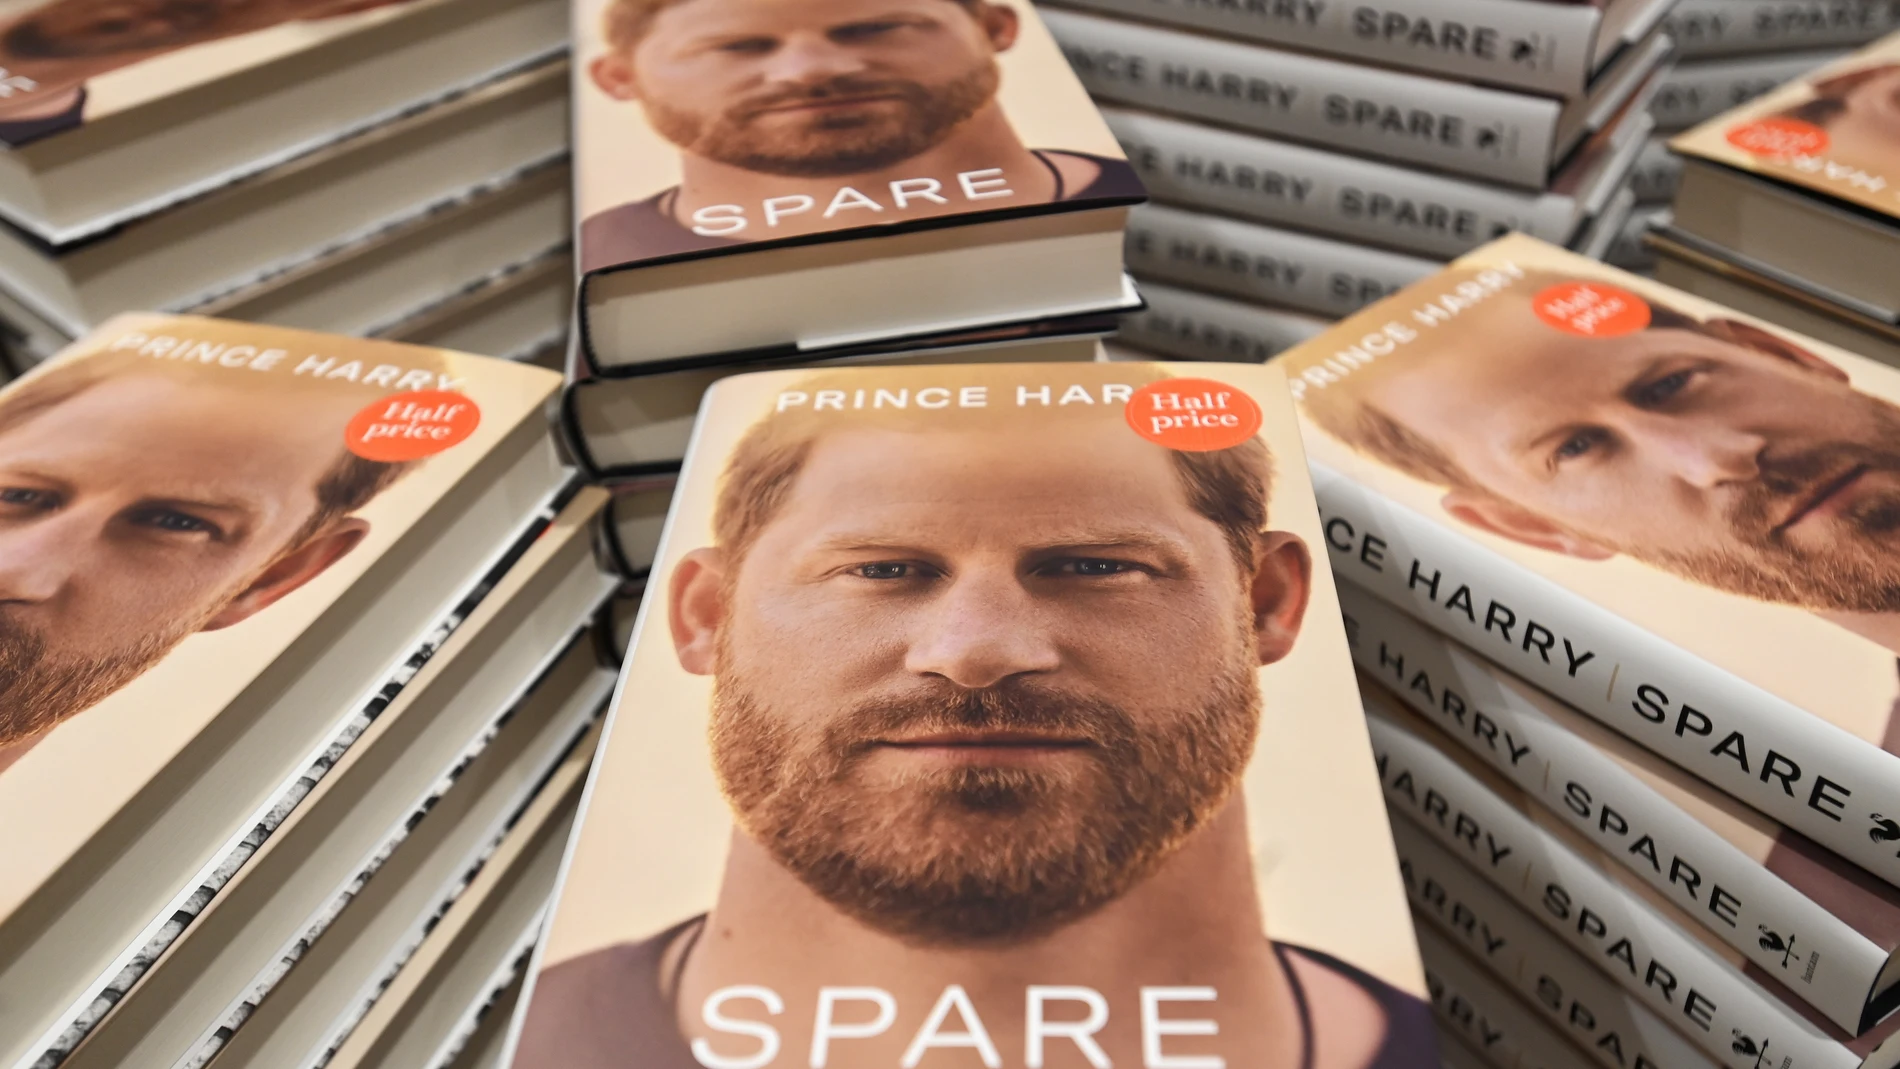 London (United Kingdom), 10/01/2023.- Prince Harry's new book 'SPARE' is displayed at a book shop in London, Britain, 10 January 2023. Prince Harry's controversial new memoir SPARE goes on sale across the UK on 10 January. (Reino Unido, Londres) EFE/EPA/ANDY RAIN